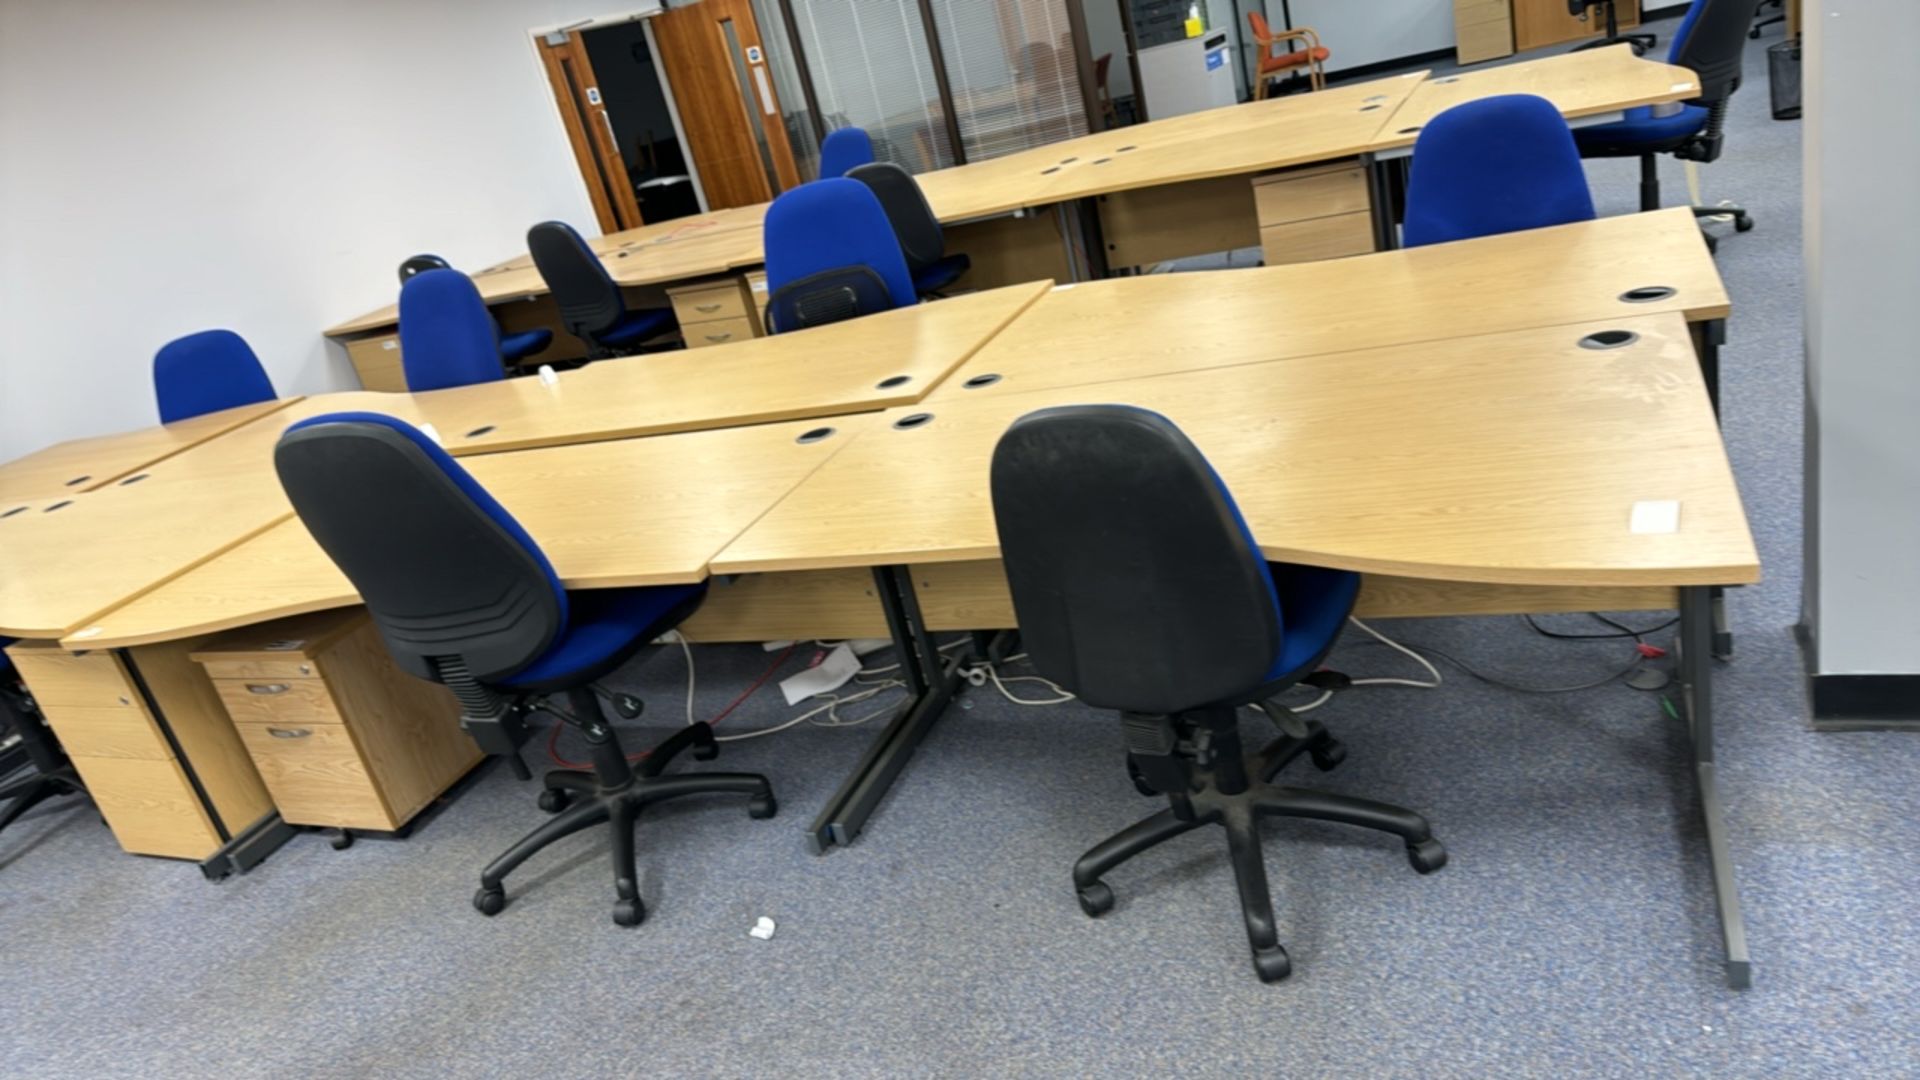 Wooden Effect Office Desks x8 With Office Chairs x8 - Image 2 of 5